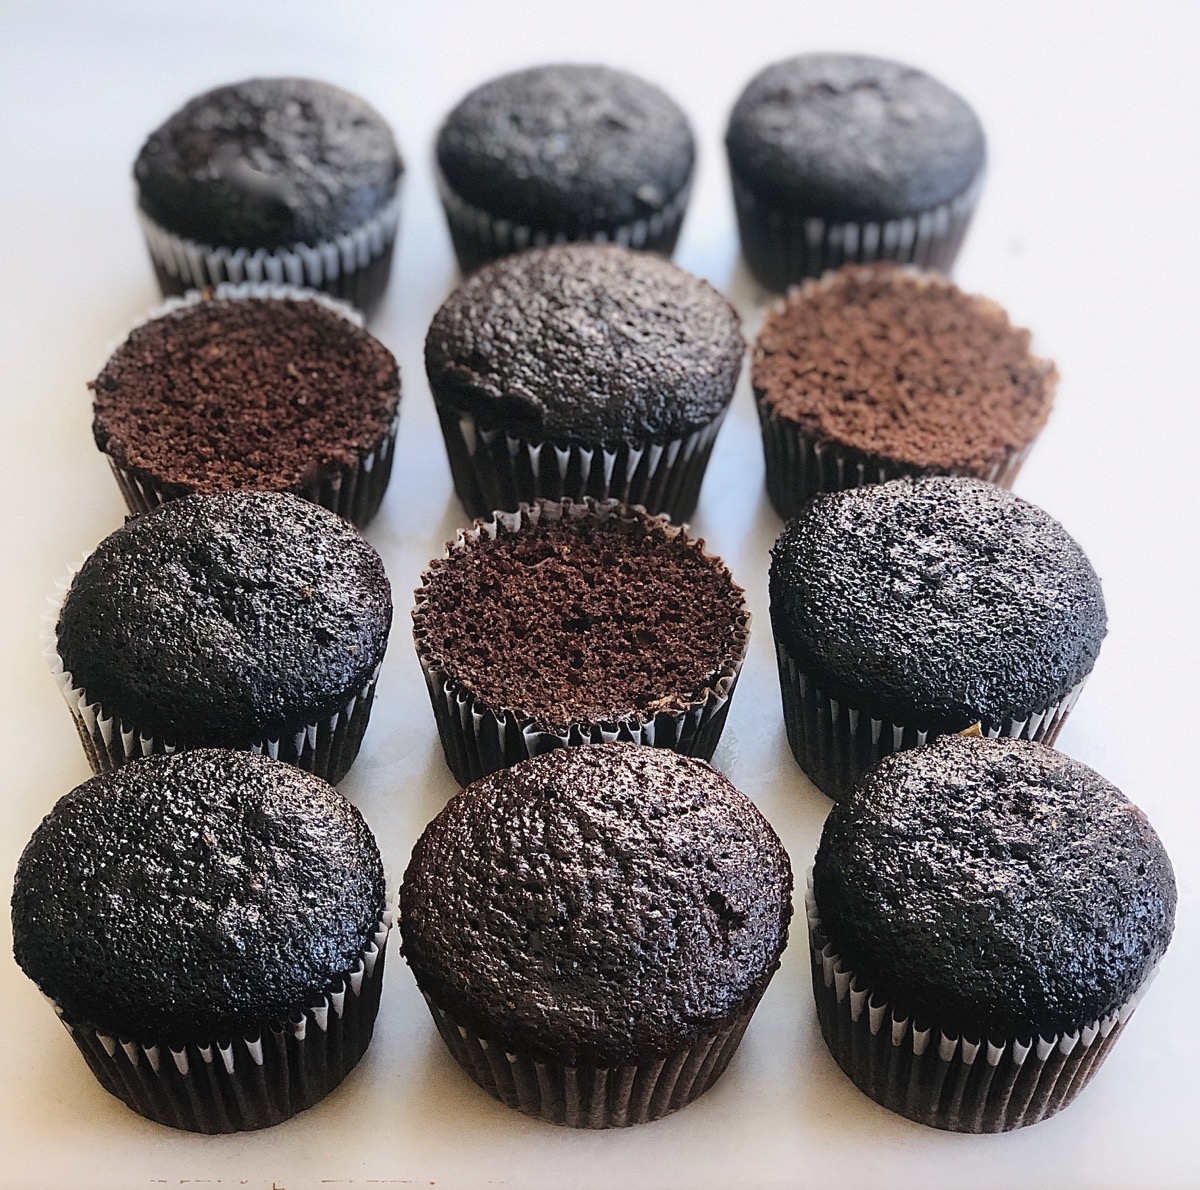 Cupcakes baked with natural cocoa, Dutch-process cocoa, and a combination.